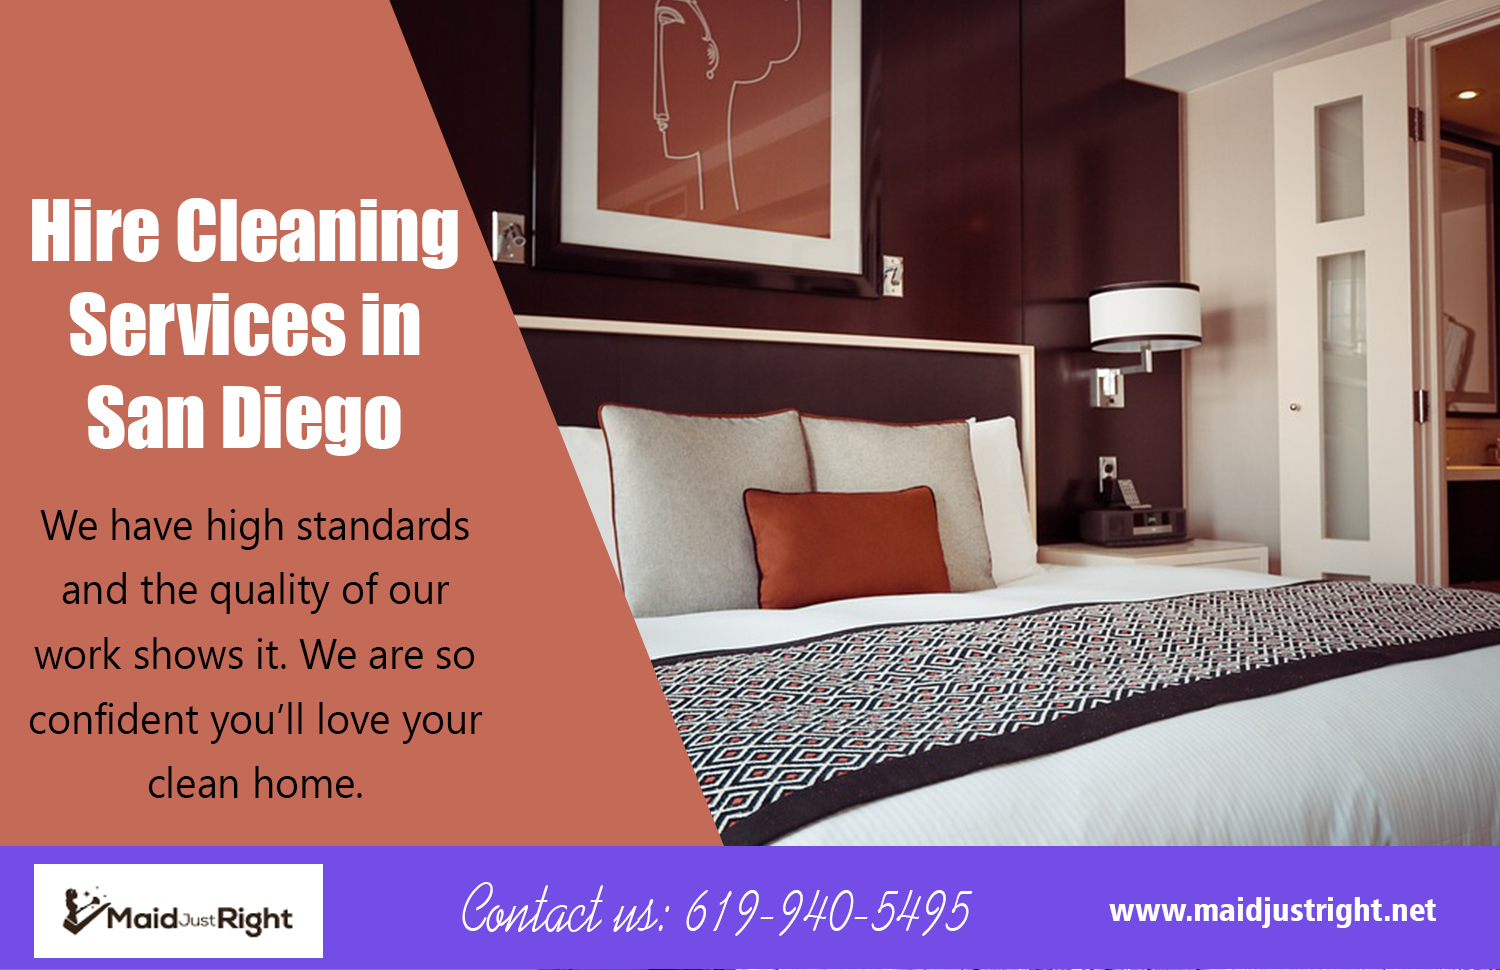 Hire Cleaning Services In San Diego | Call Us - 619-940-5495 | maidjustright.net